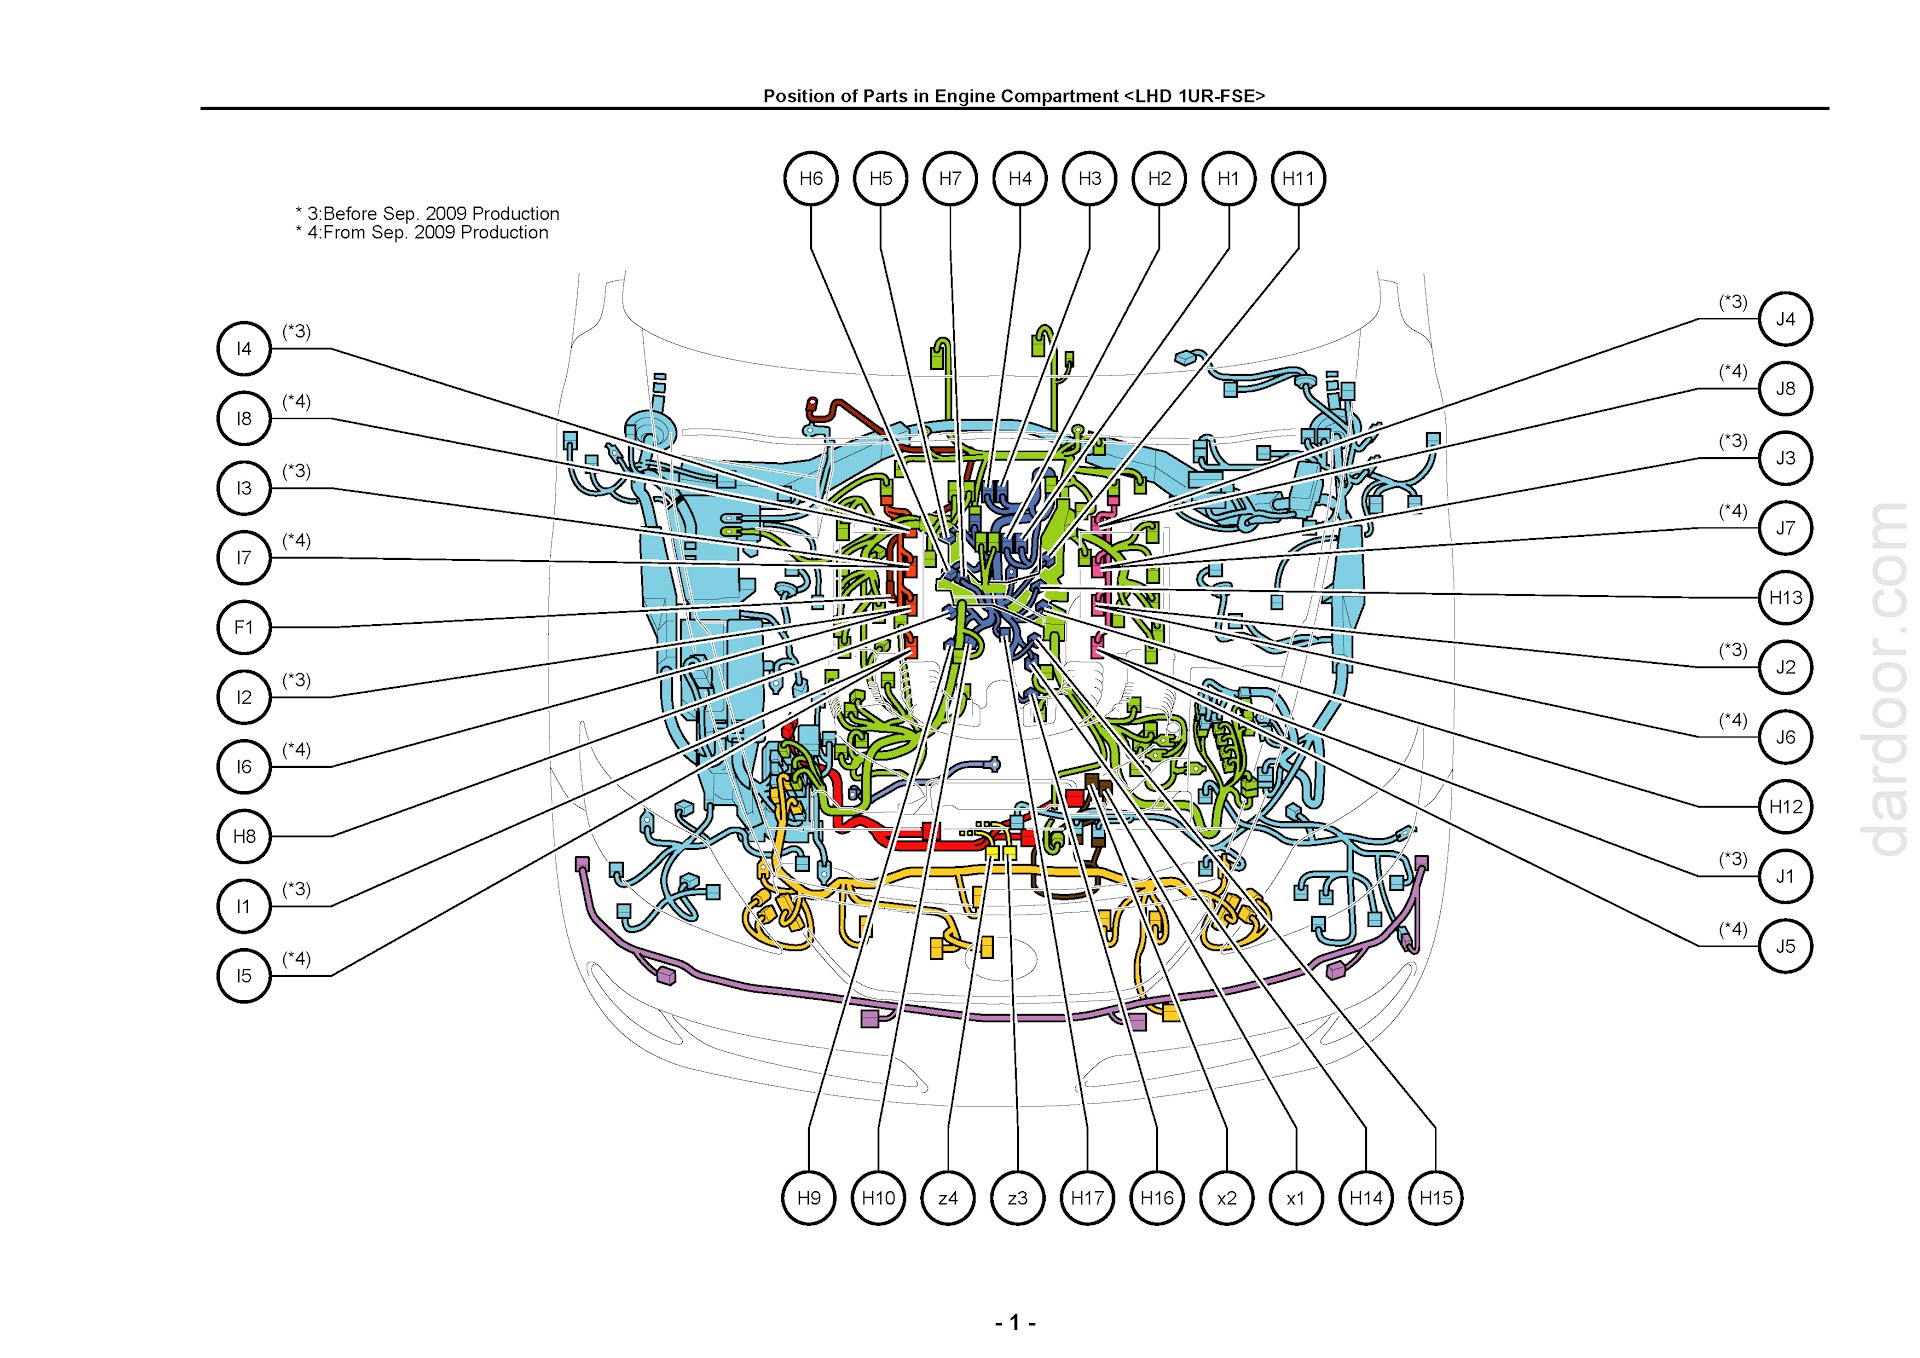 2014 Lexus LS460 and LS460L Wiring Diagram, Position of Parts in Engine Room